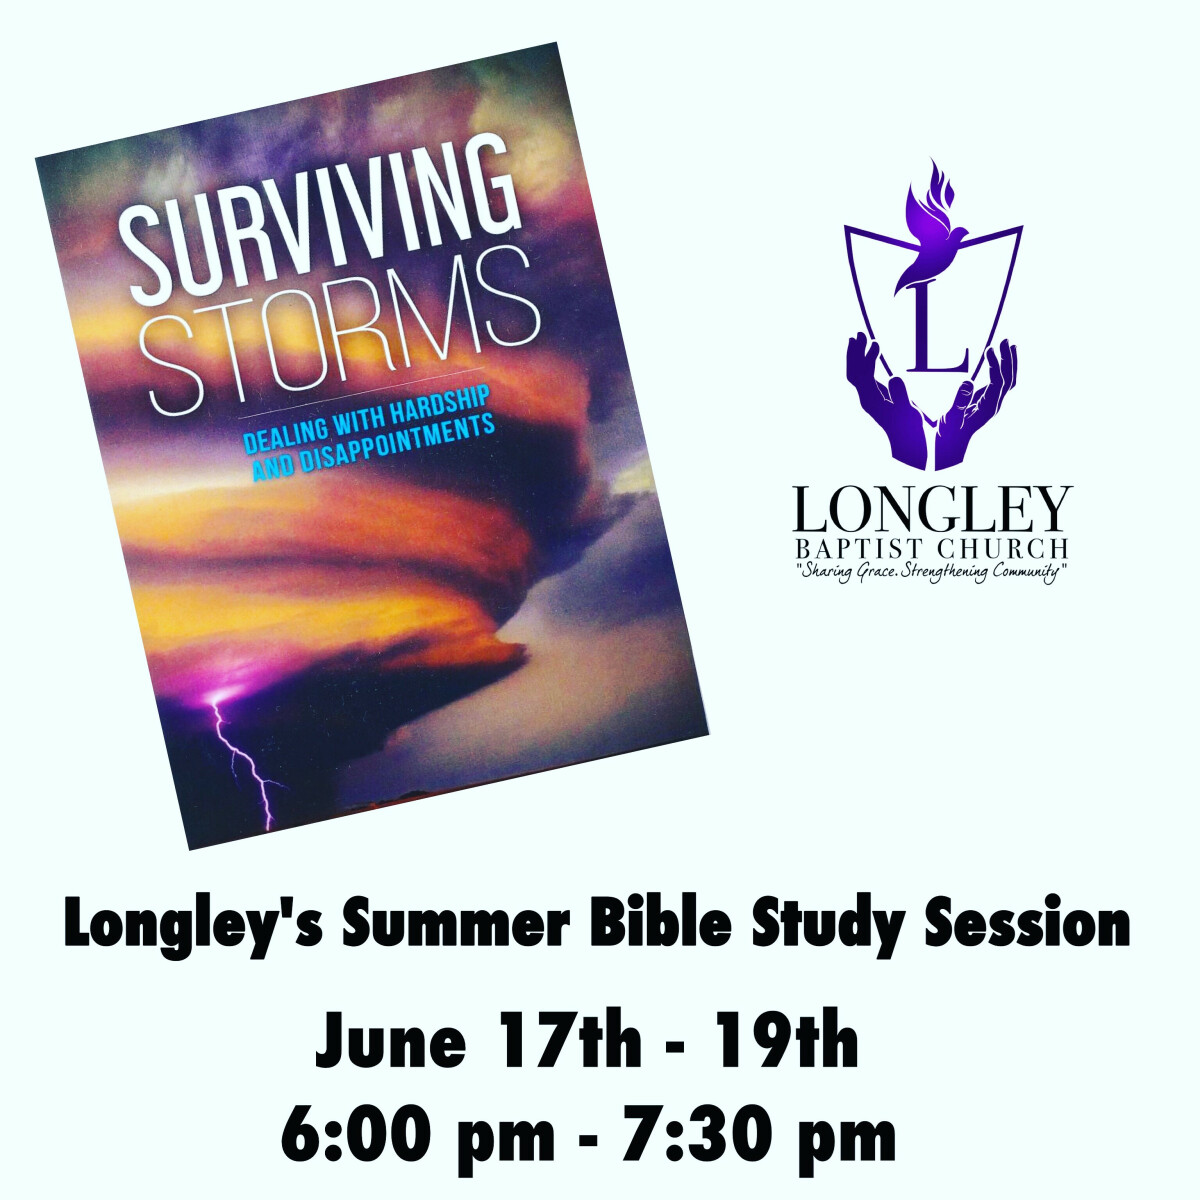 Longley's Summer Bible Study Session